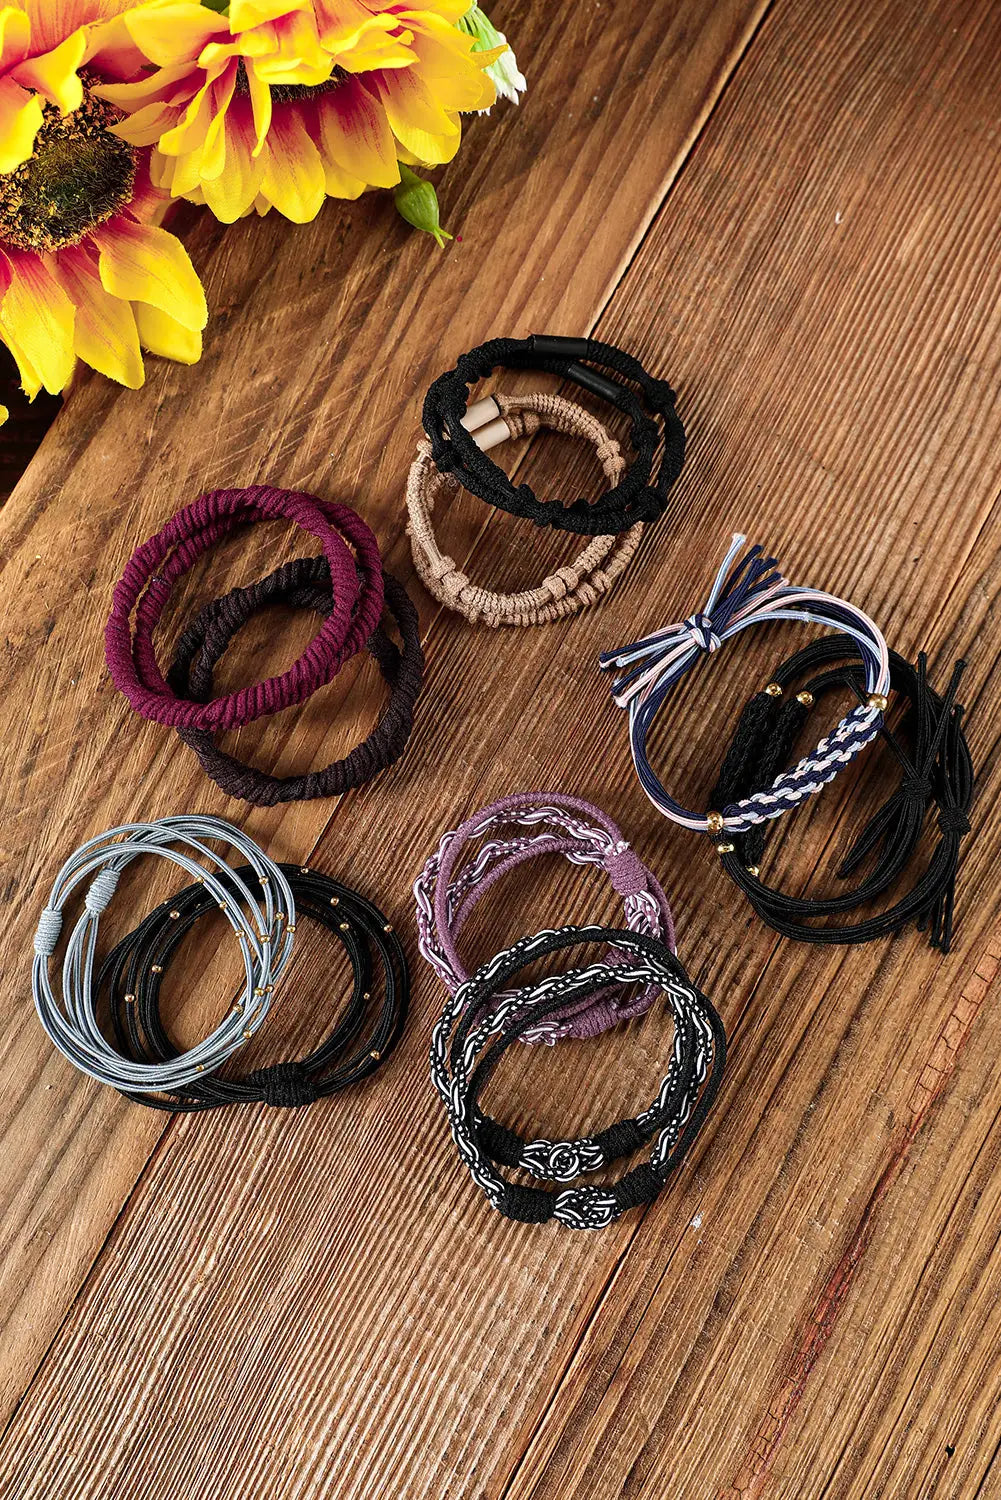 Black multicolour 20pcs boho knotted hair ties - one size / 100% polyester - tie sets